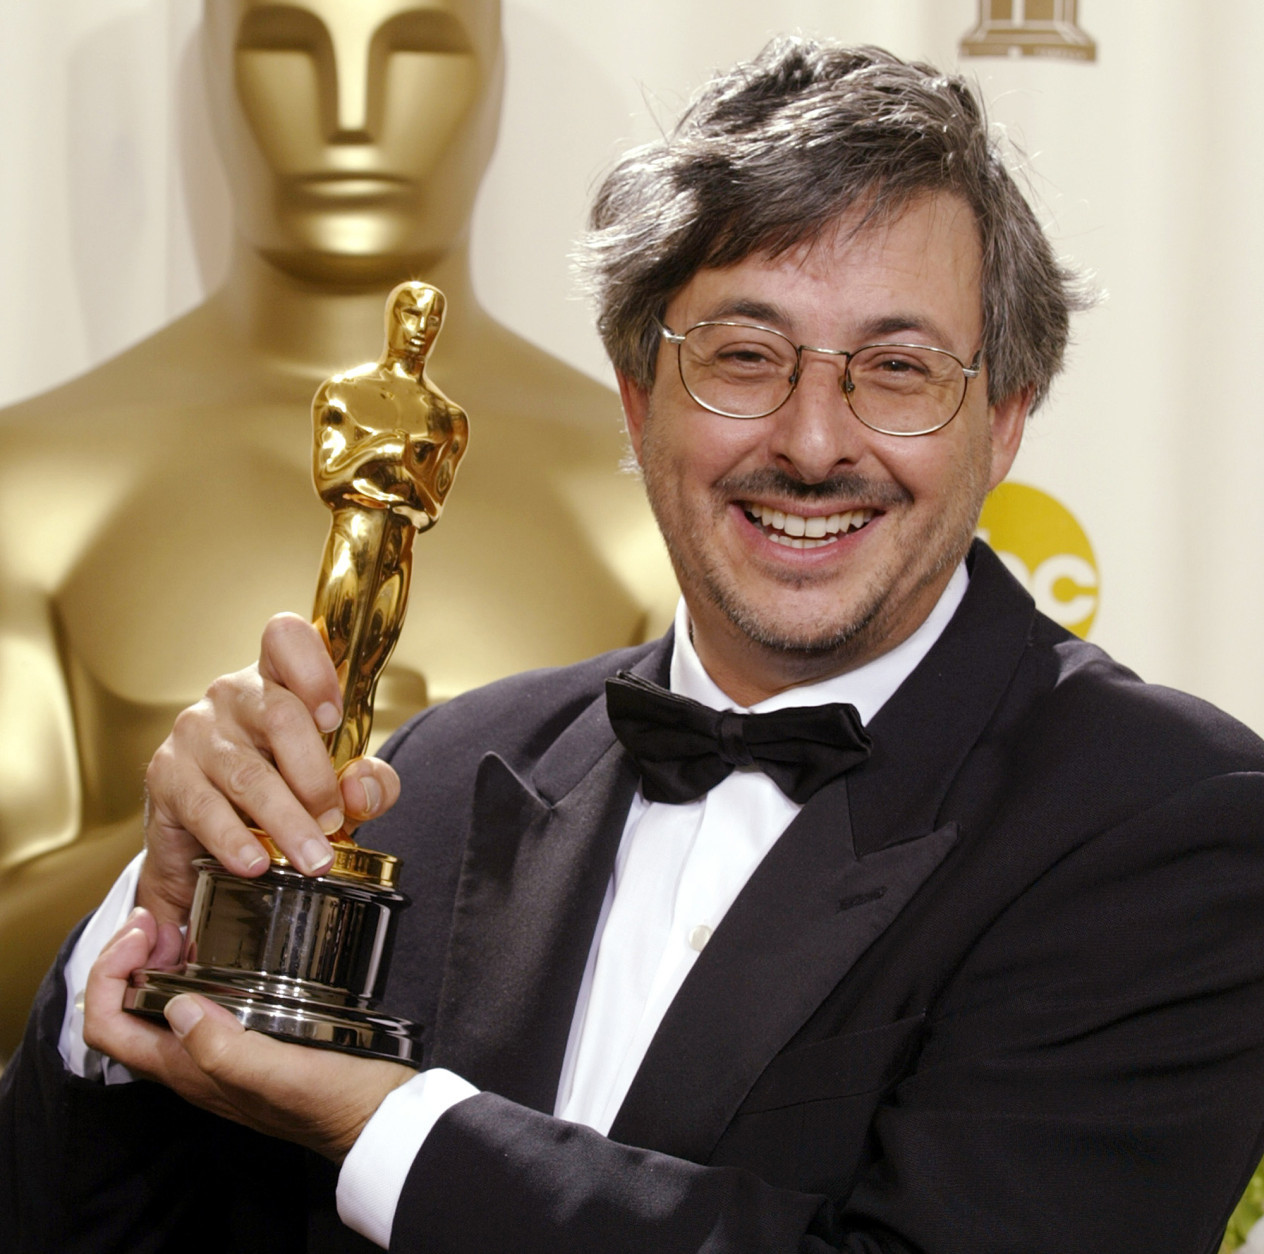 FILE - In this March 24, 2002 file photo, Andrew Lesnie poses with his Oscar trophy for cinematography for the film "Lord of the Rings: The Fellowship of the Rings" during the 74th annual Academy Awards in Los Angeles. Oscar-winning Australian cinematographer Lesnie, best known for his work on "The Lord of the Rings," has died, friends and colleagues said Wednesday, April 29, 2015. He was 59. (AP Photo/Doug Mills, File)